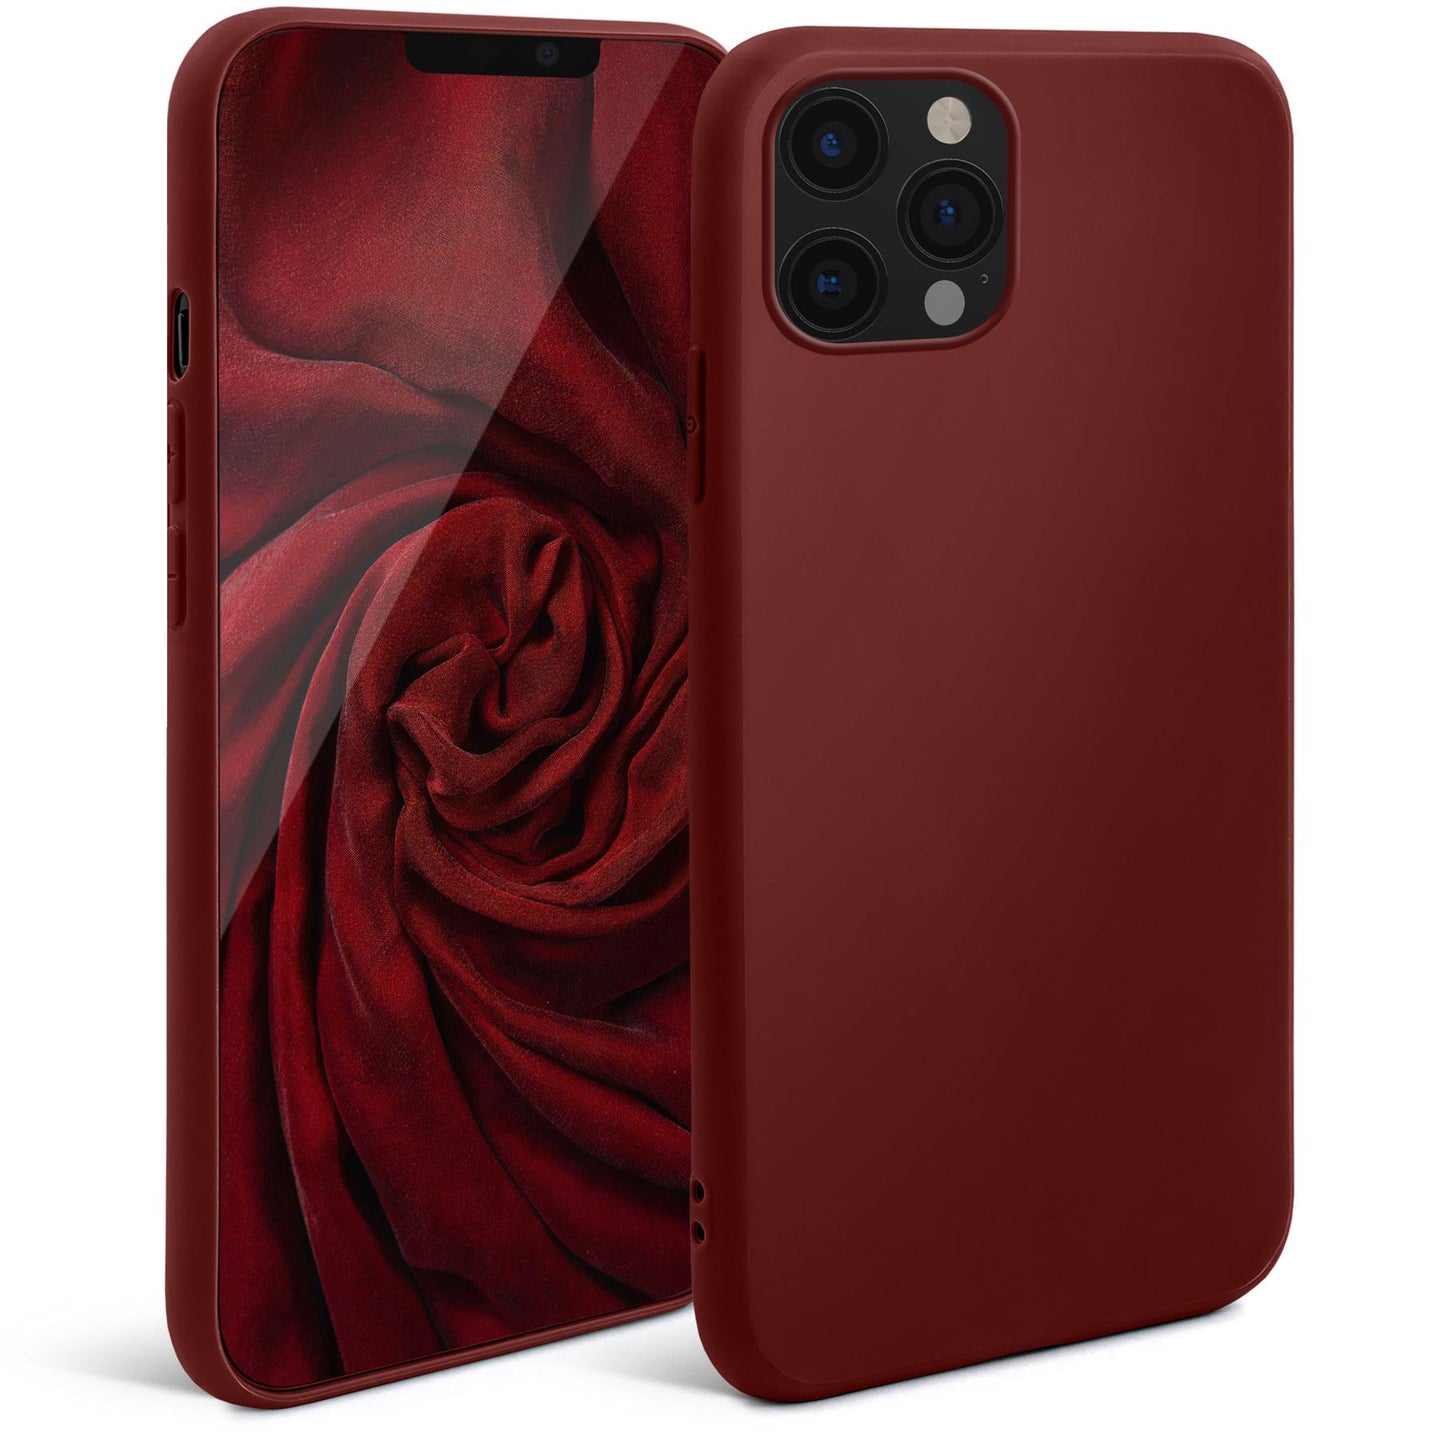 Moozy Minimalist Series Silicone Case for iPhone 12, iPhone 12 Pro, Wine Red - Matte Finish Slim Soft TPU Cover